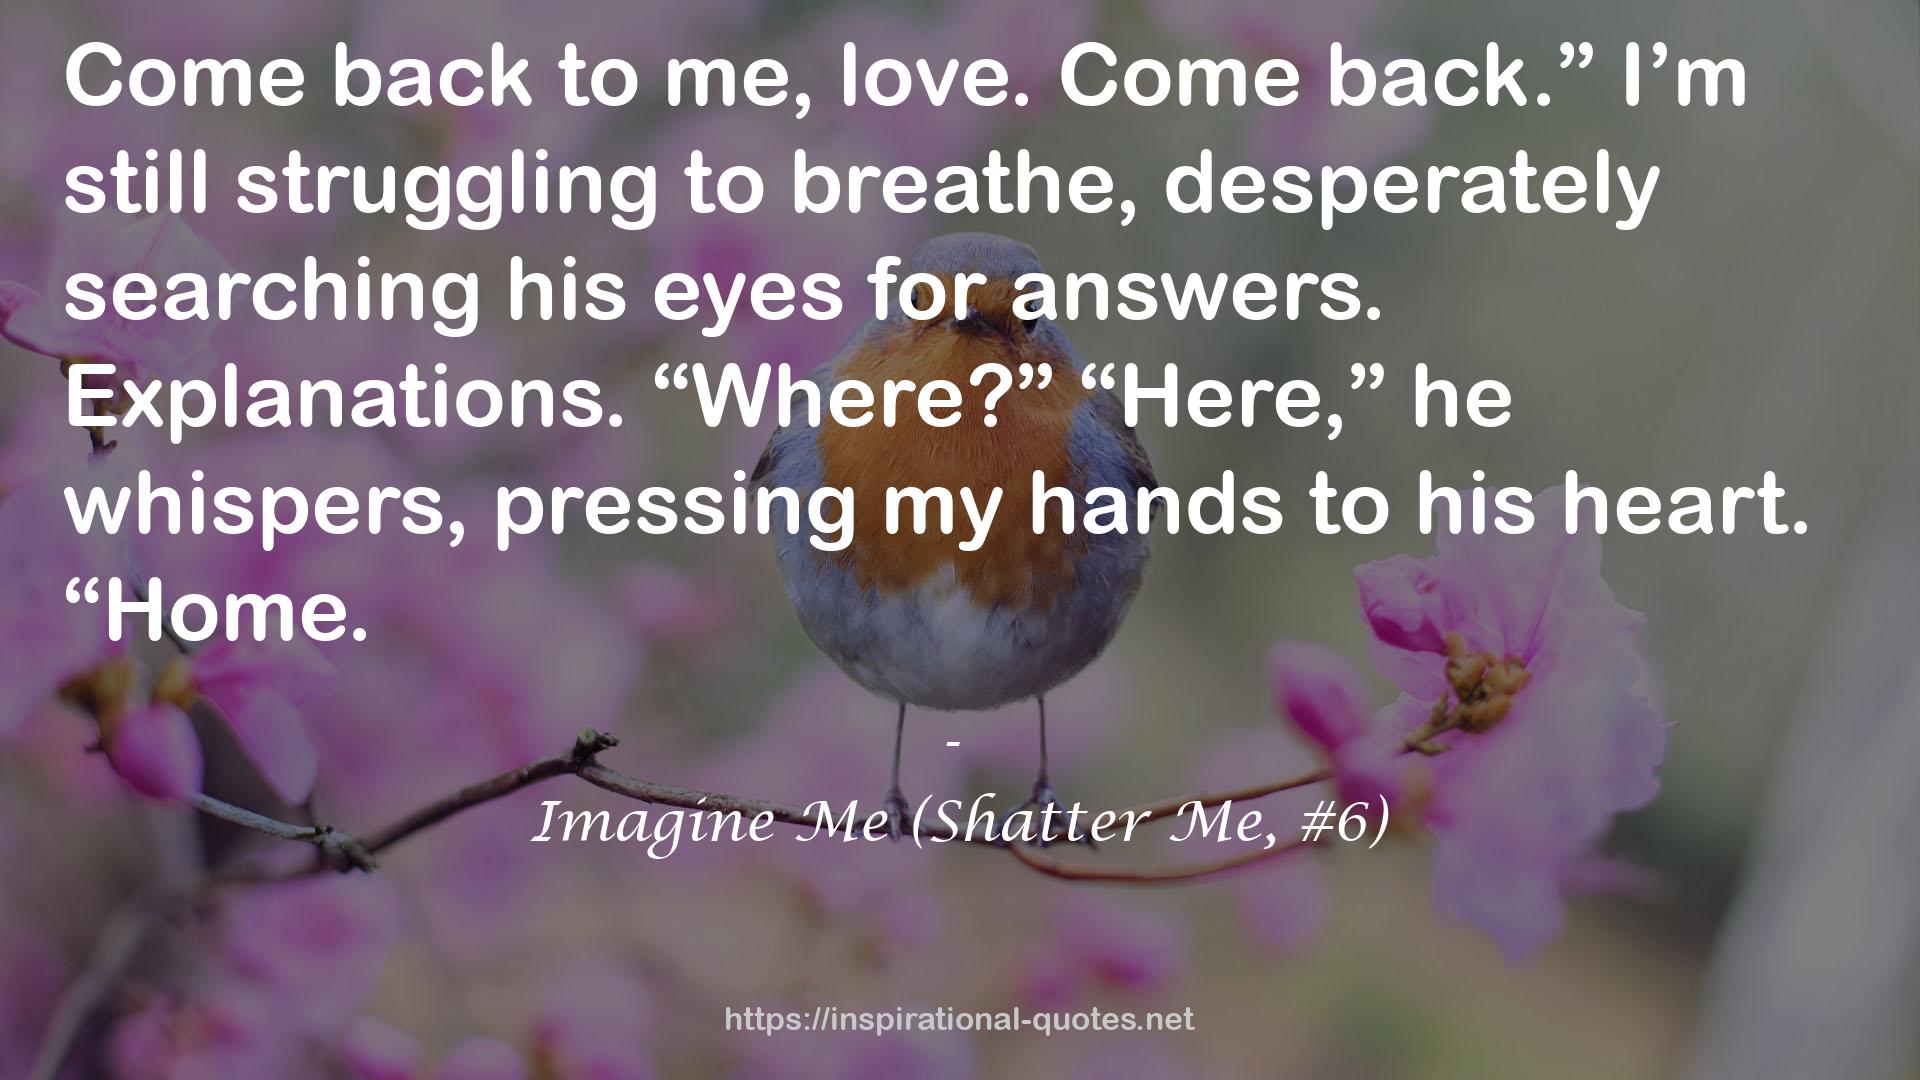 Imagine Me (Shatter Me, #6) QUOTES